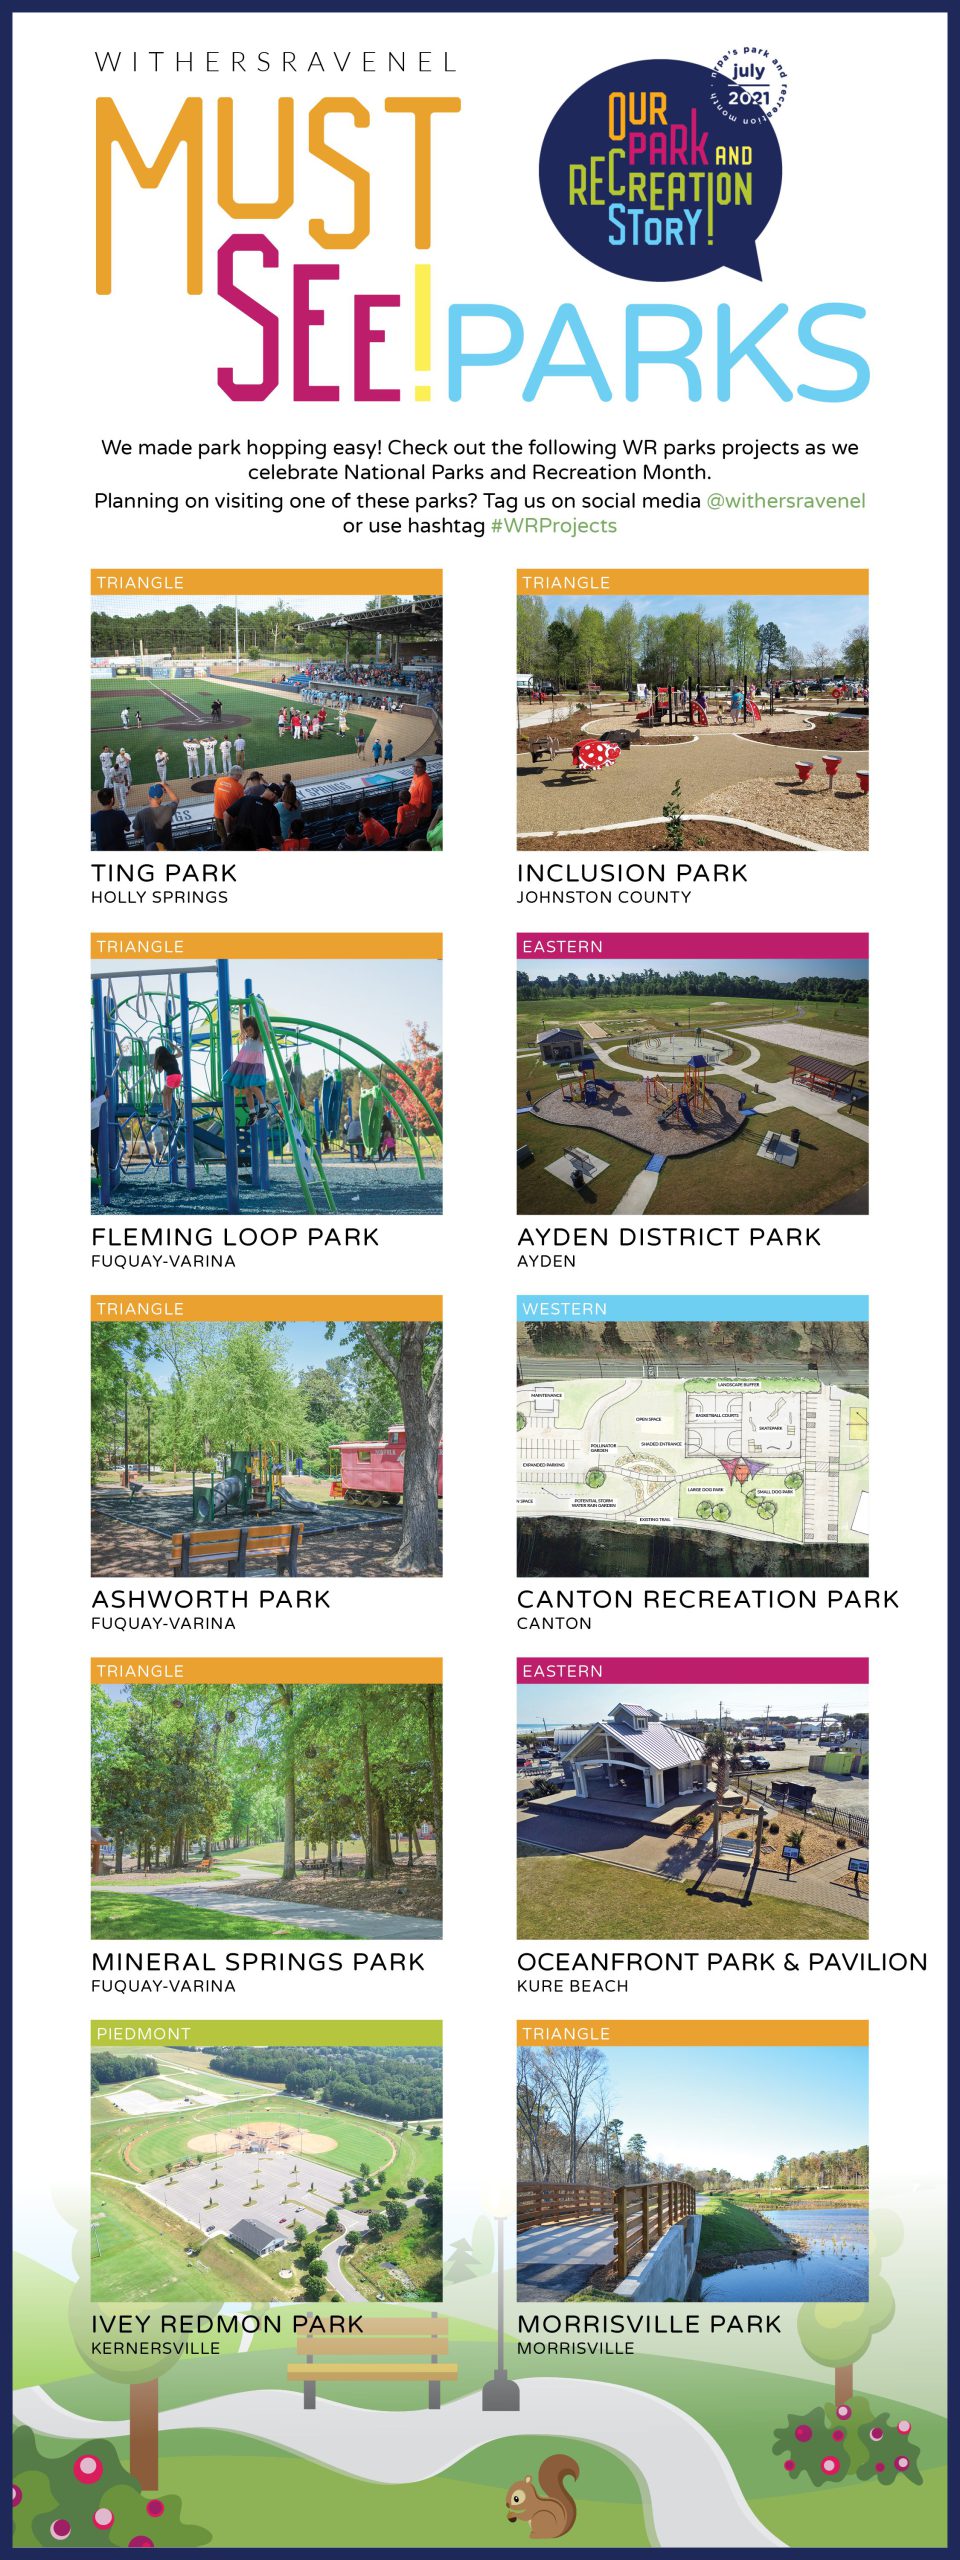 A poster of North Carolina park projects designed by WithersRavenel that people can visit during Park and Recreation Month